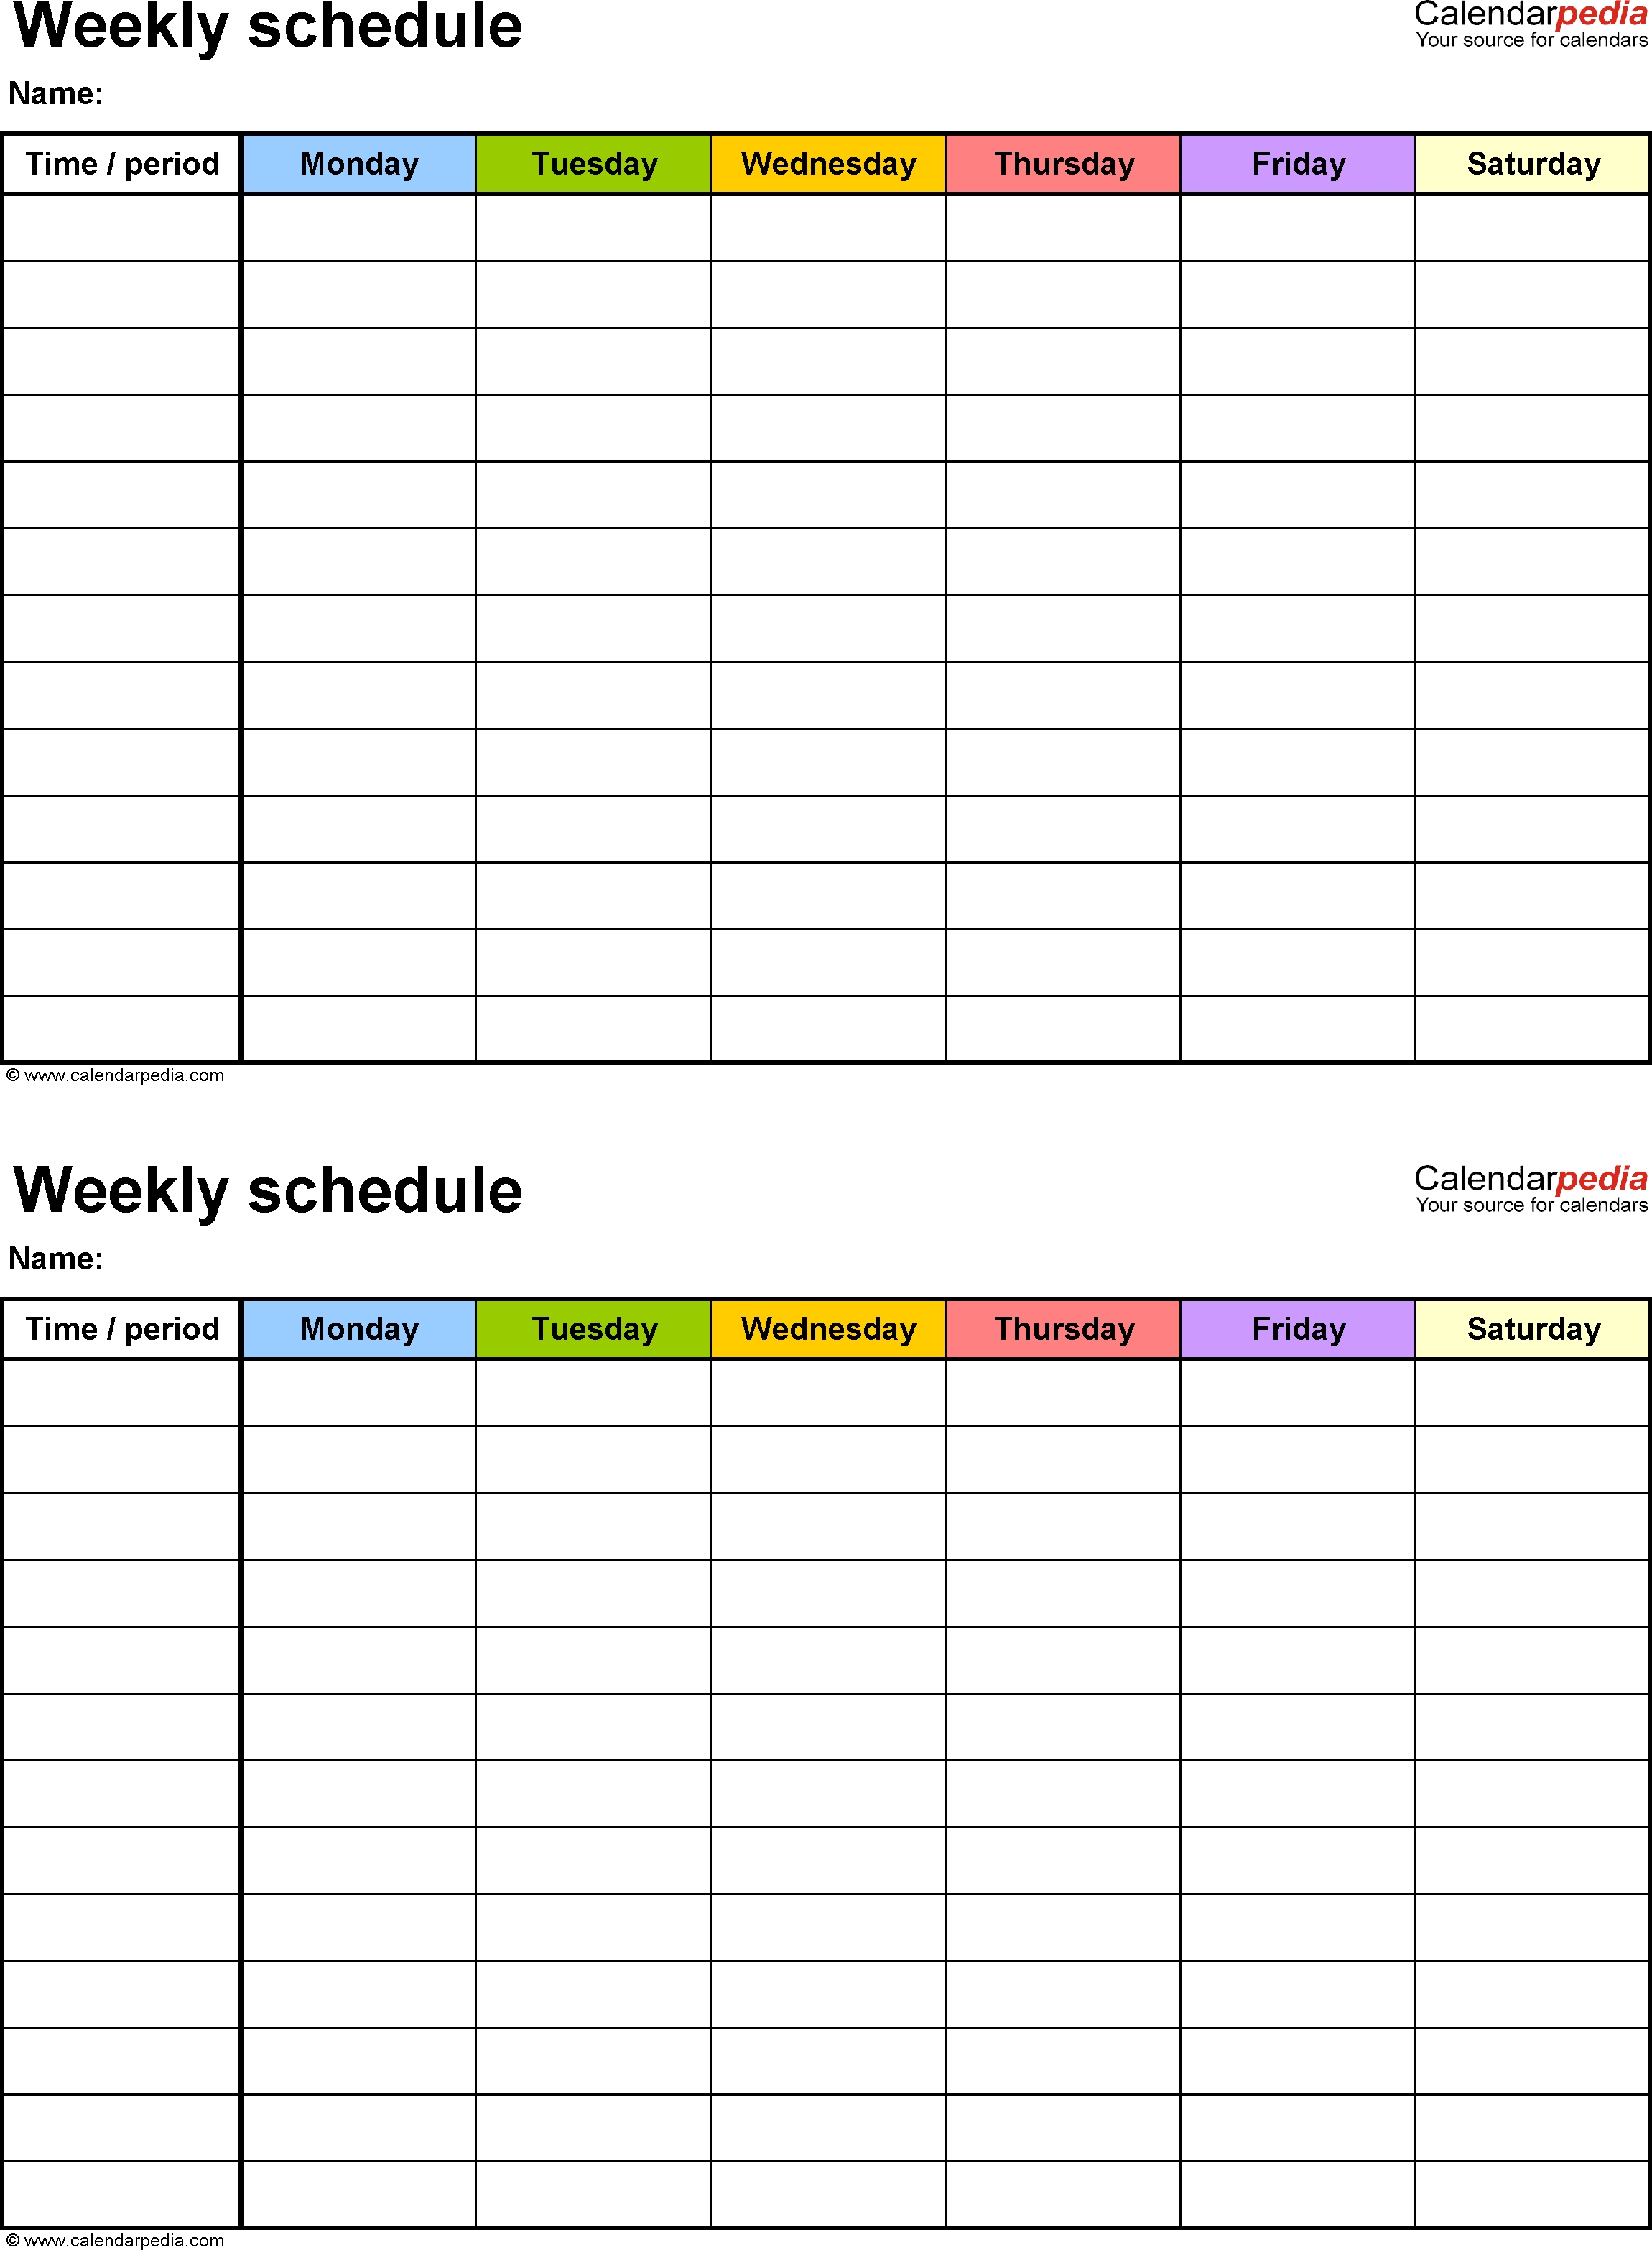 Free Weekly Schedule Templates For Excel - 18 Templates with regard to Week 2 Weekly Calendar Printable